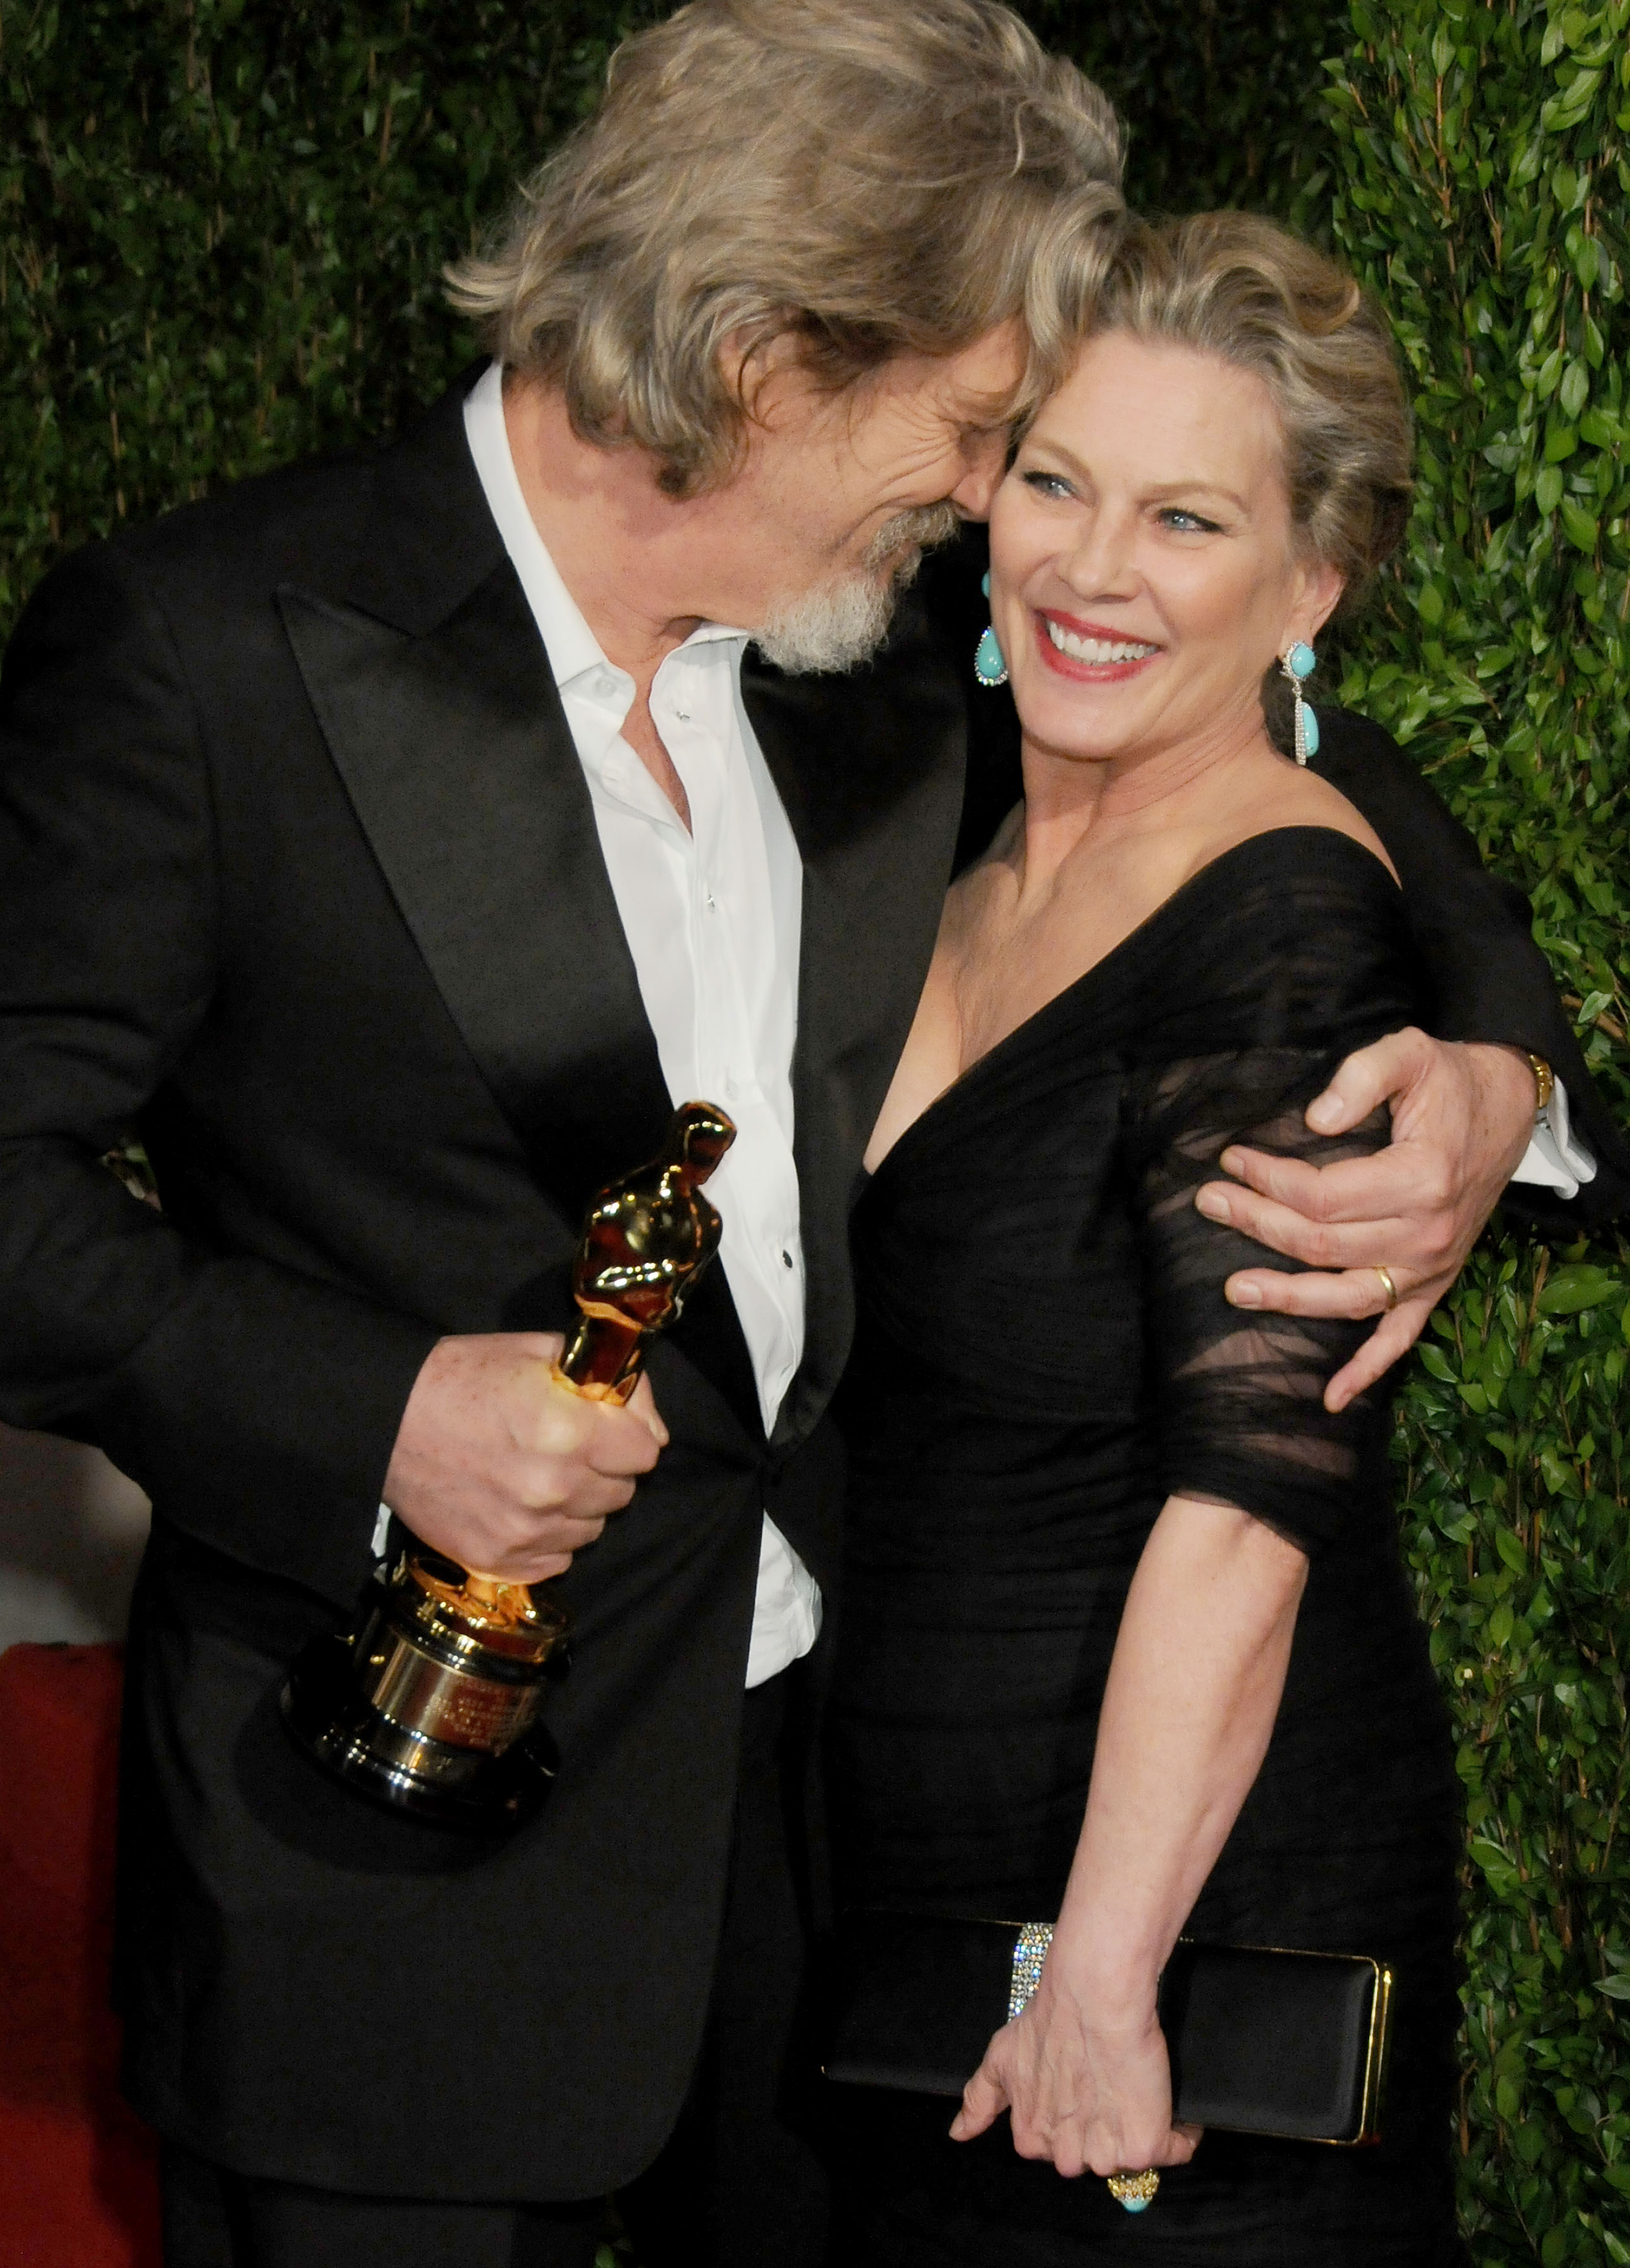 Jeff and Susan Bridges attend the Vanity Fair Oscar Party 2010 held at the Sunset Towers Hotel in West Hollywood, California on March 7, 2010. | Source: Getty Images